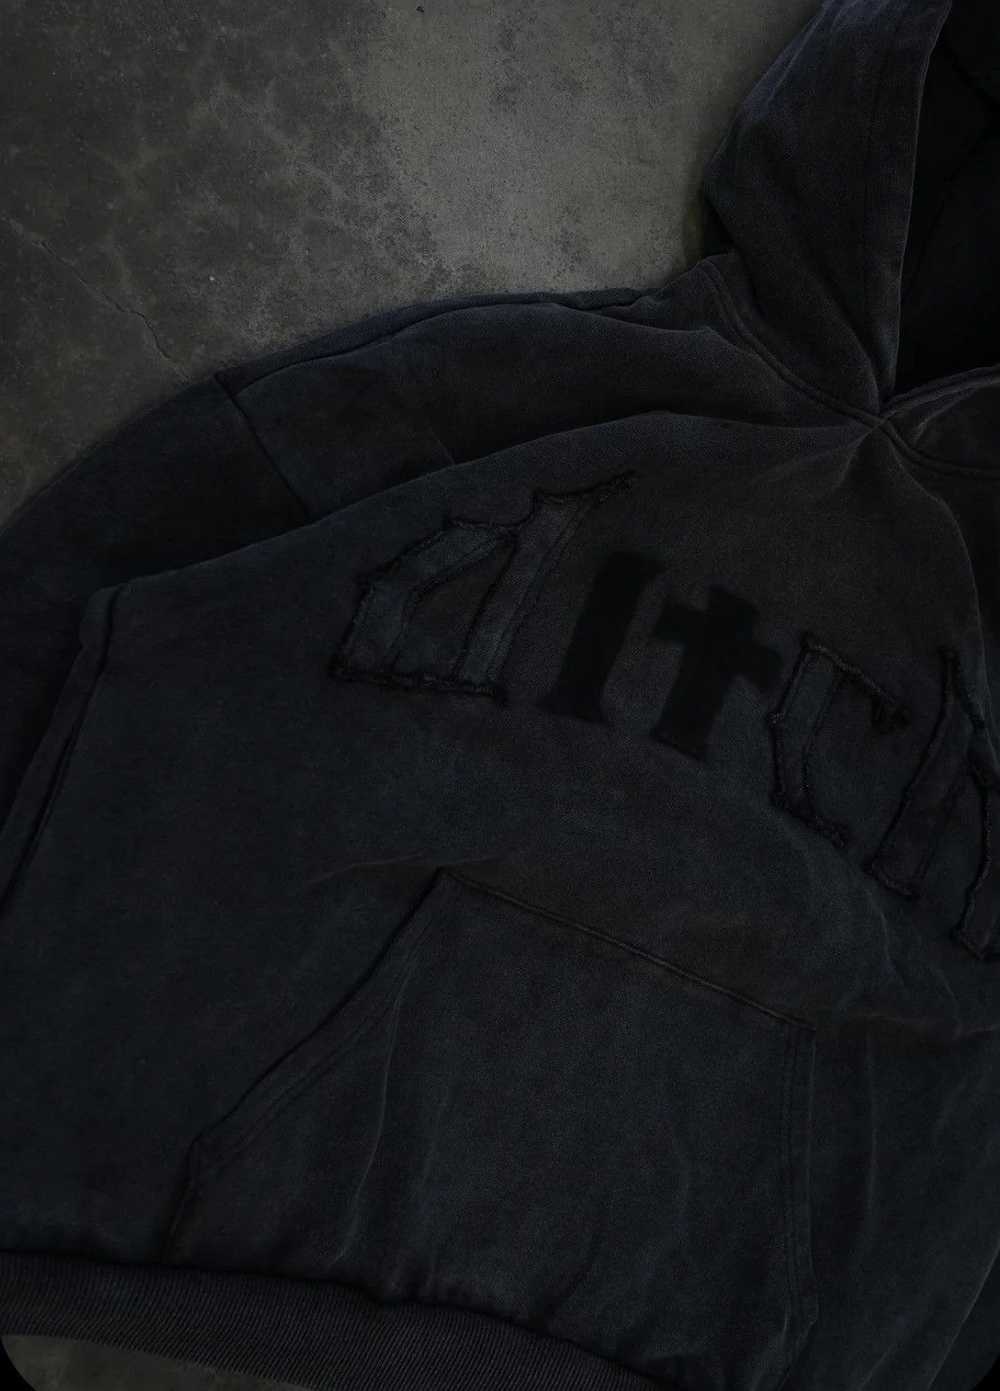 Other × Streetwear Ditch La “Coal” Missing Patch … - image 2